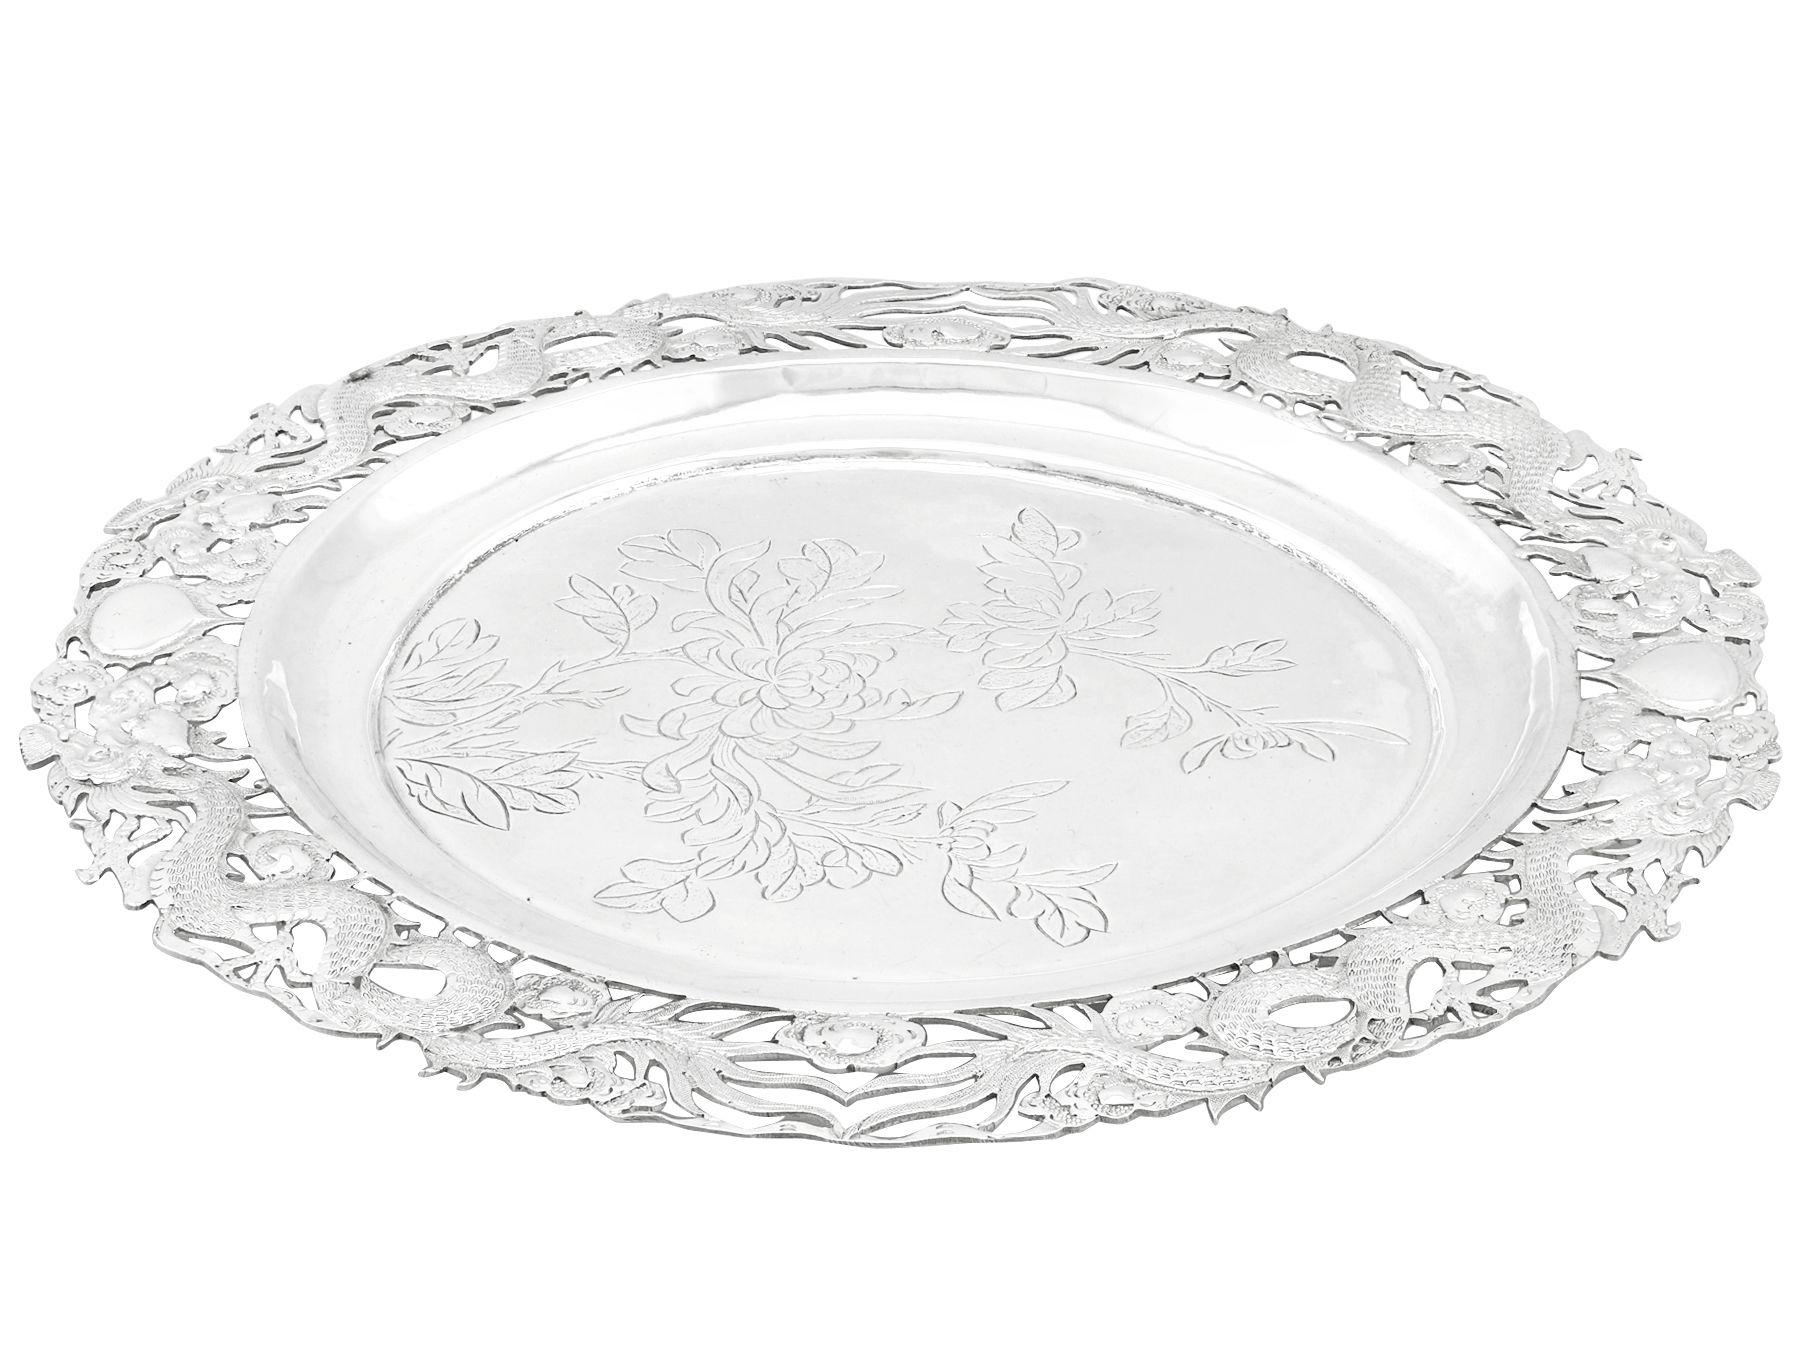 This impressive antique Chinese Export Silver (CES) salver has a circular shaped form.

The centre of the salver is embellished with an engraved chrysanthemum floral design.

The raised swept, plateaued border is ornamented with four exceptional